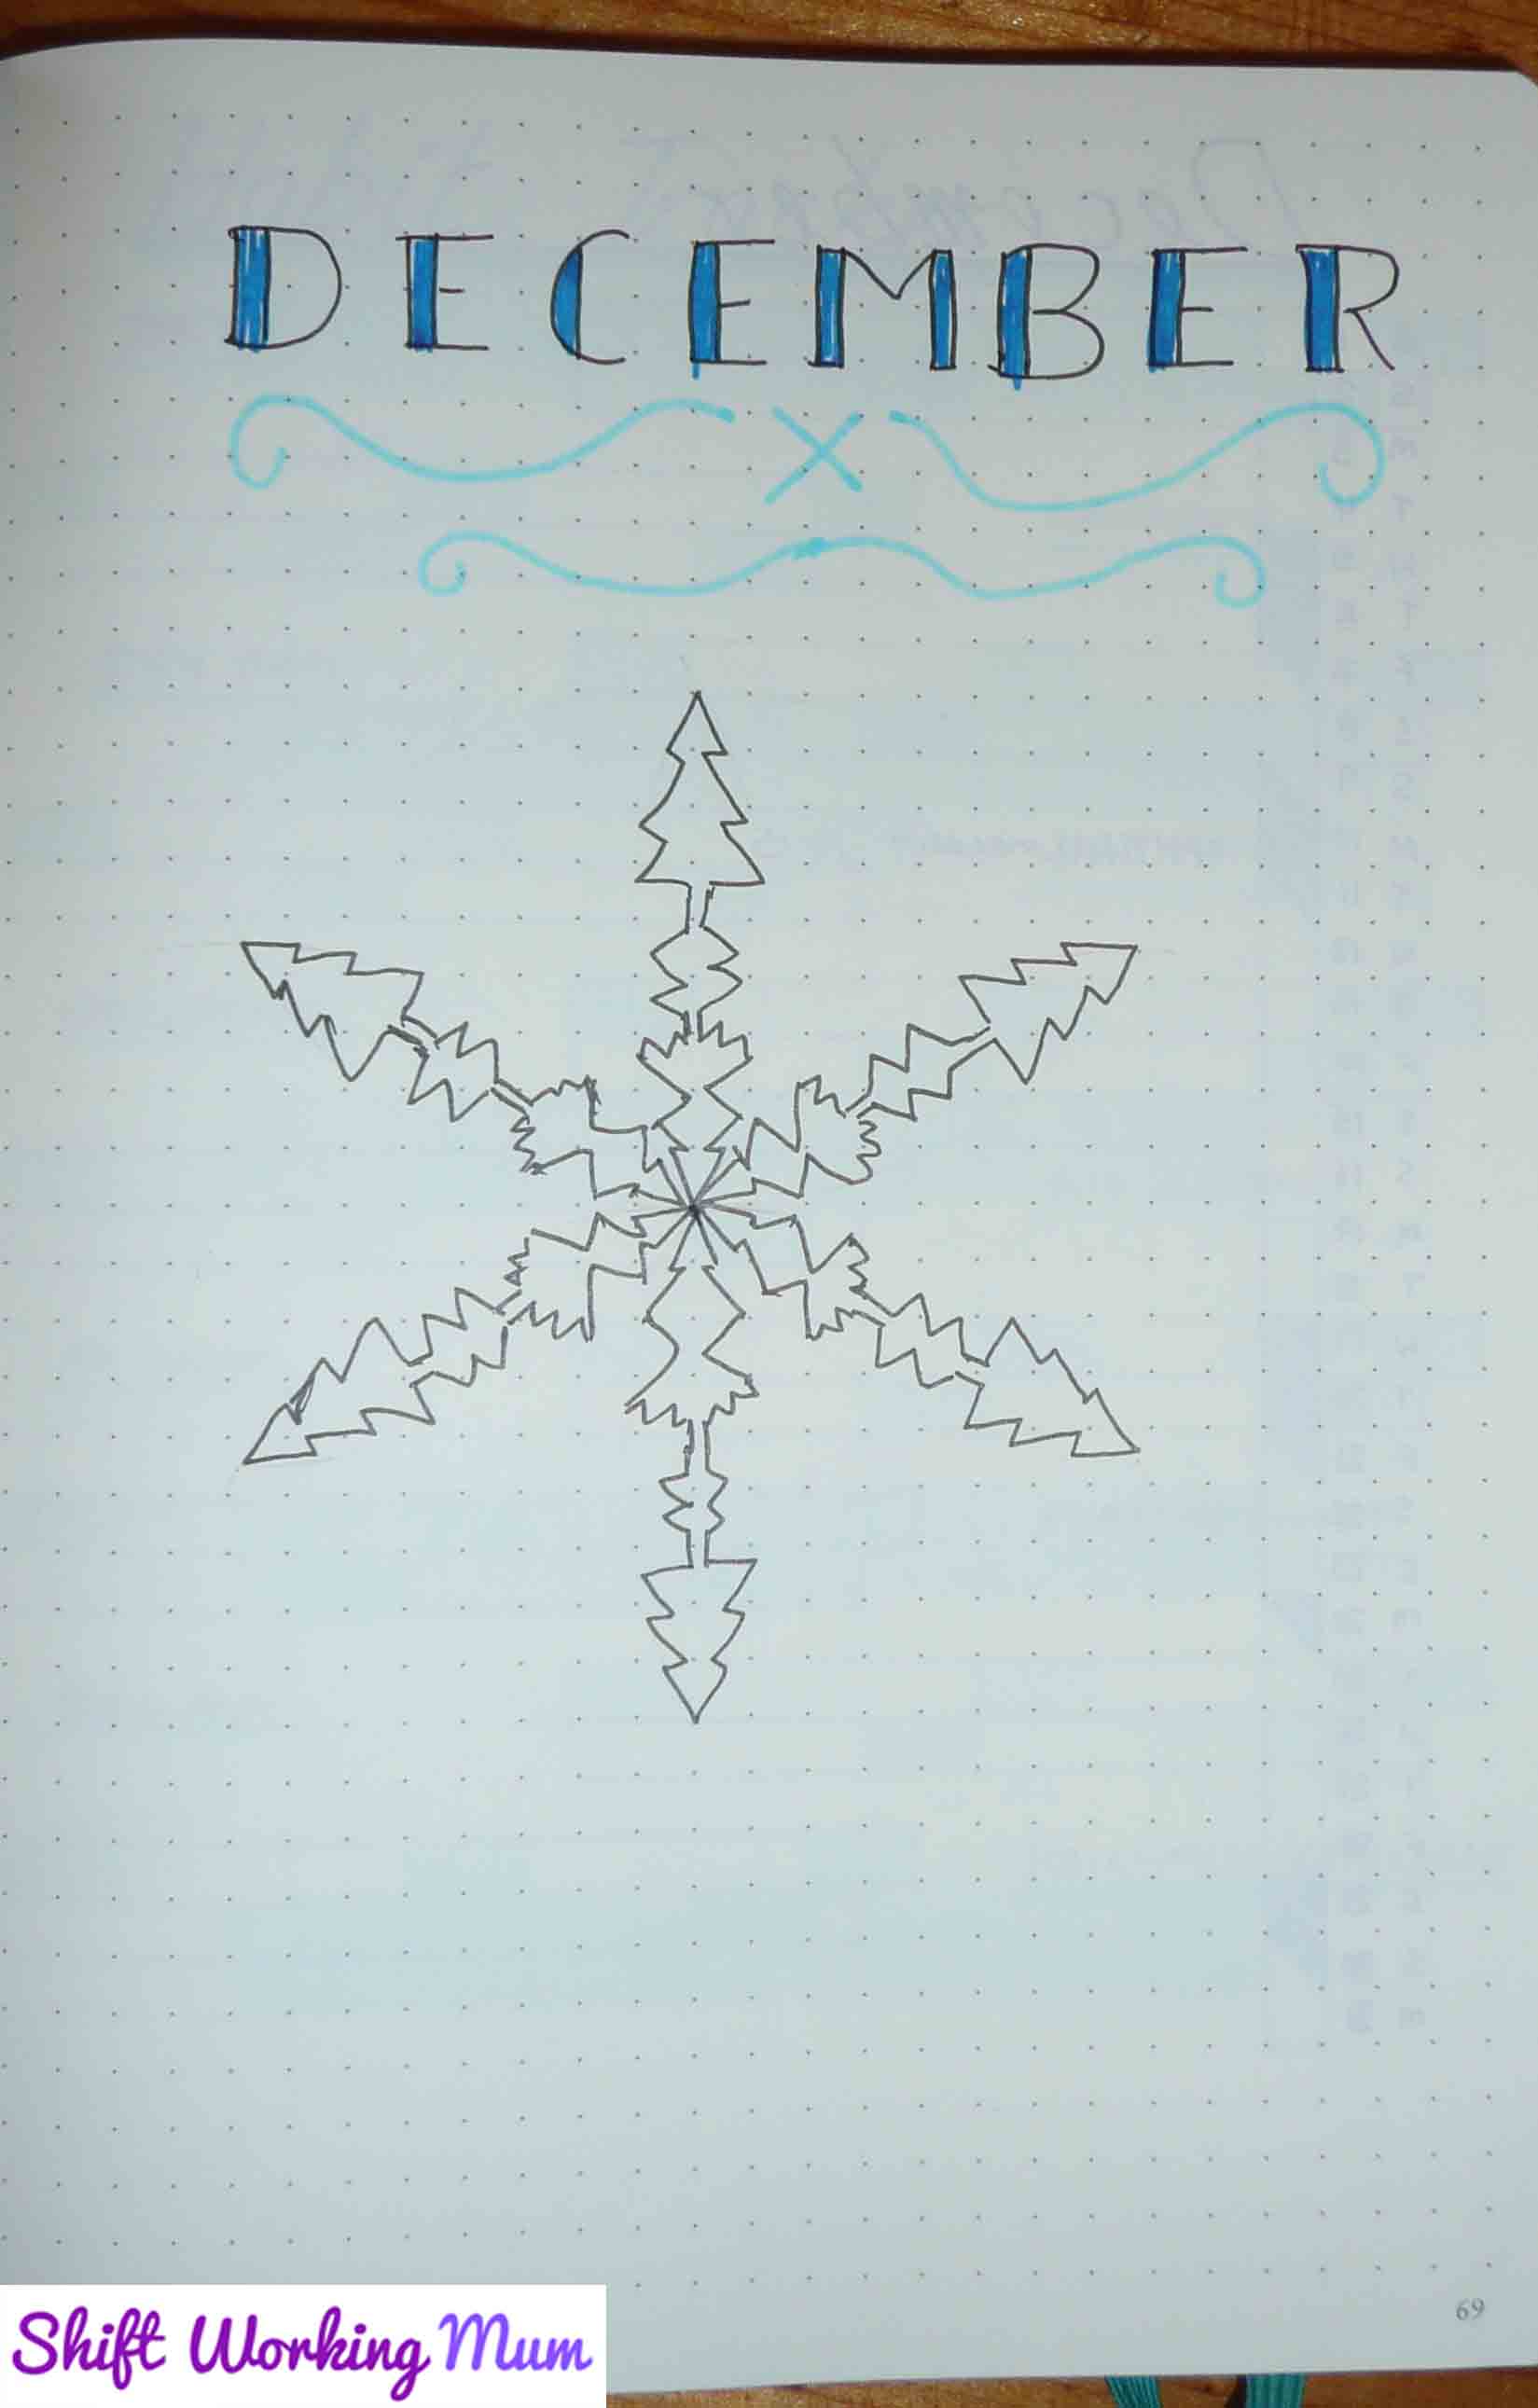 December cover page, December in block print and a drawing of a snowflake